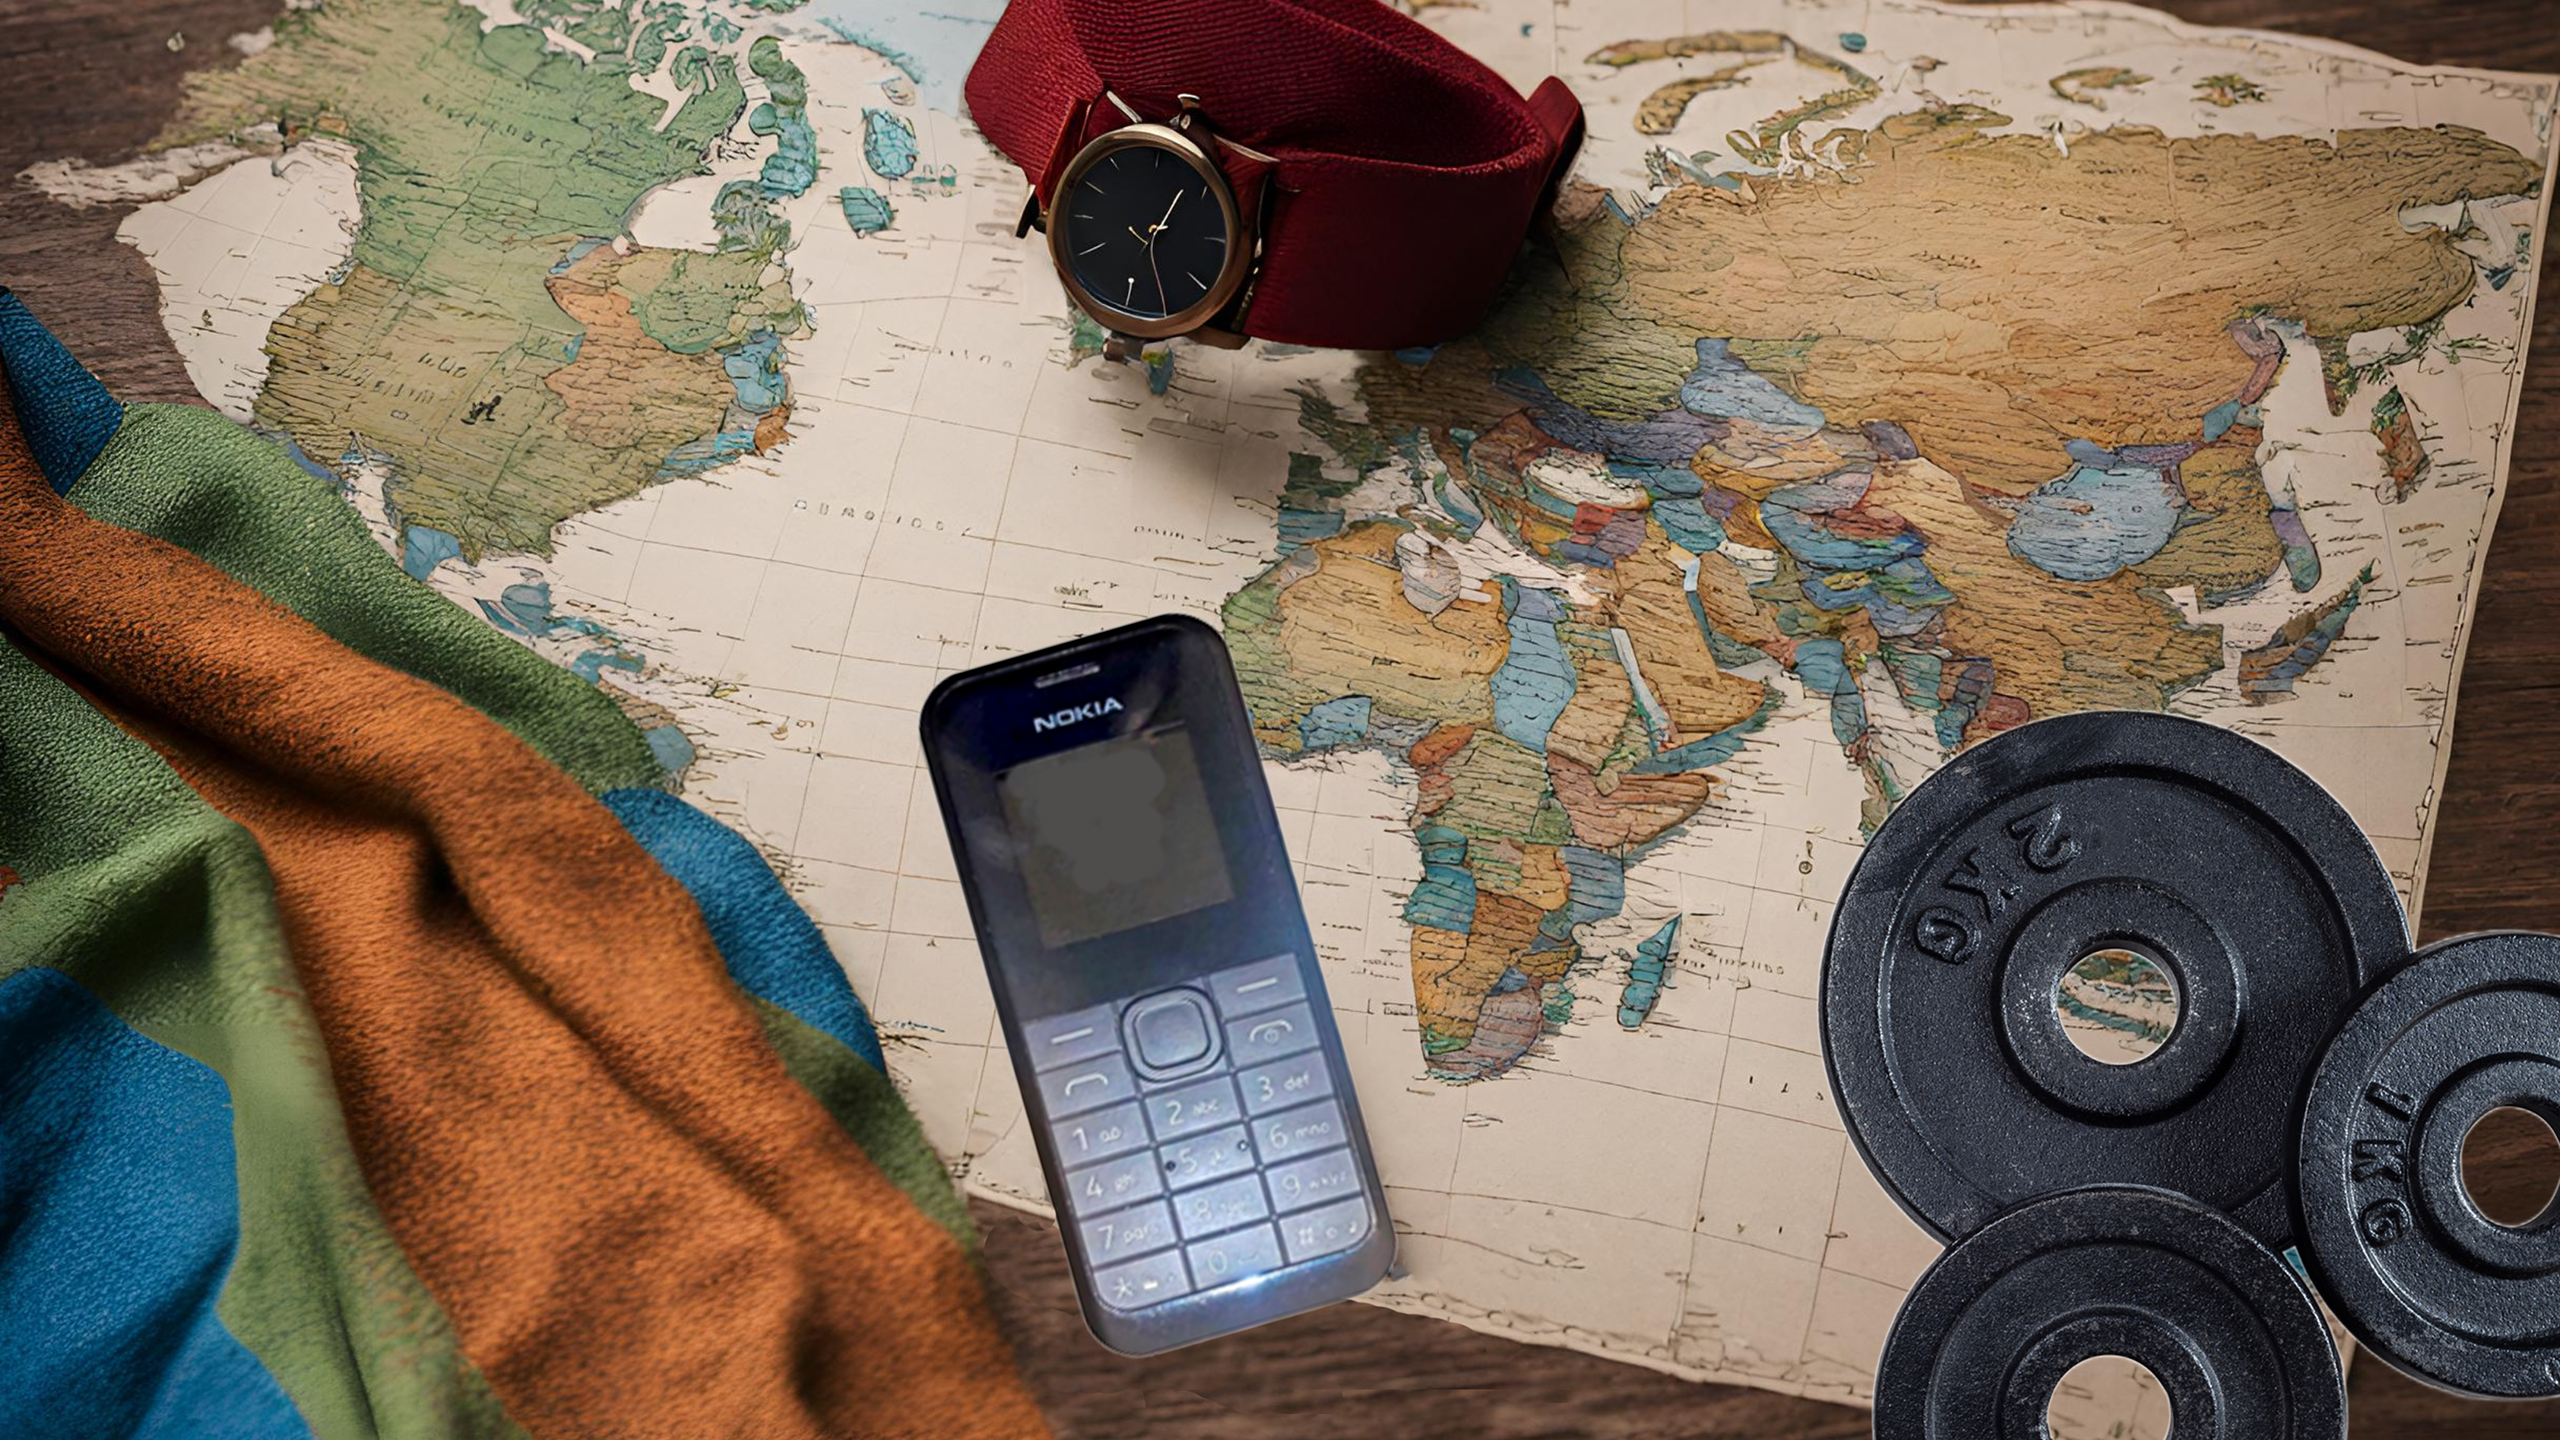 an image showing a map, cell phone, wristwatch, dumbbell and a blanket